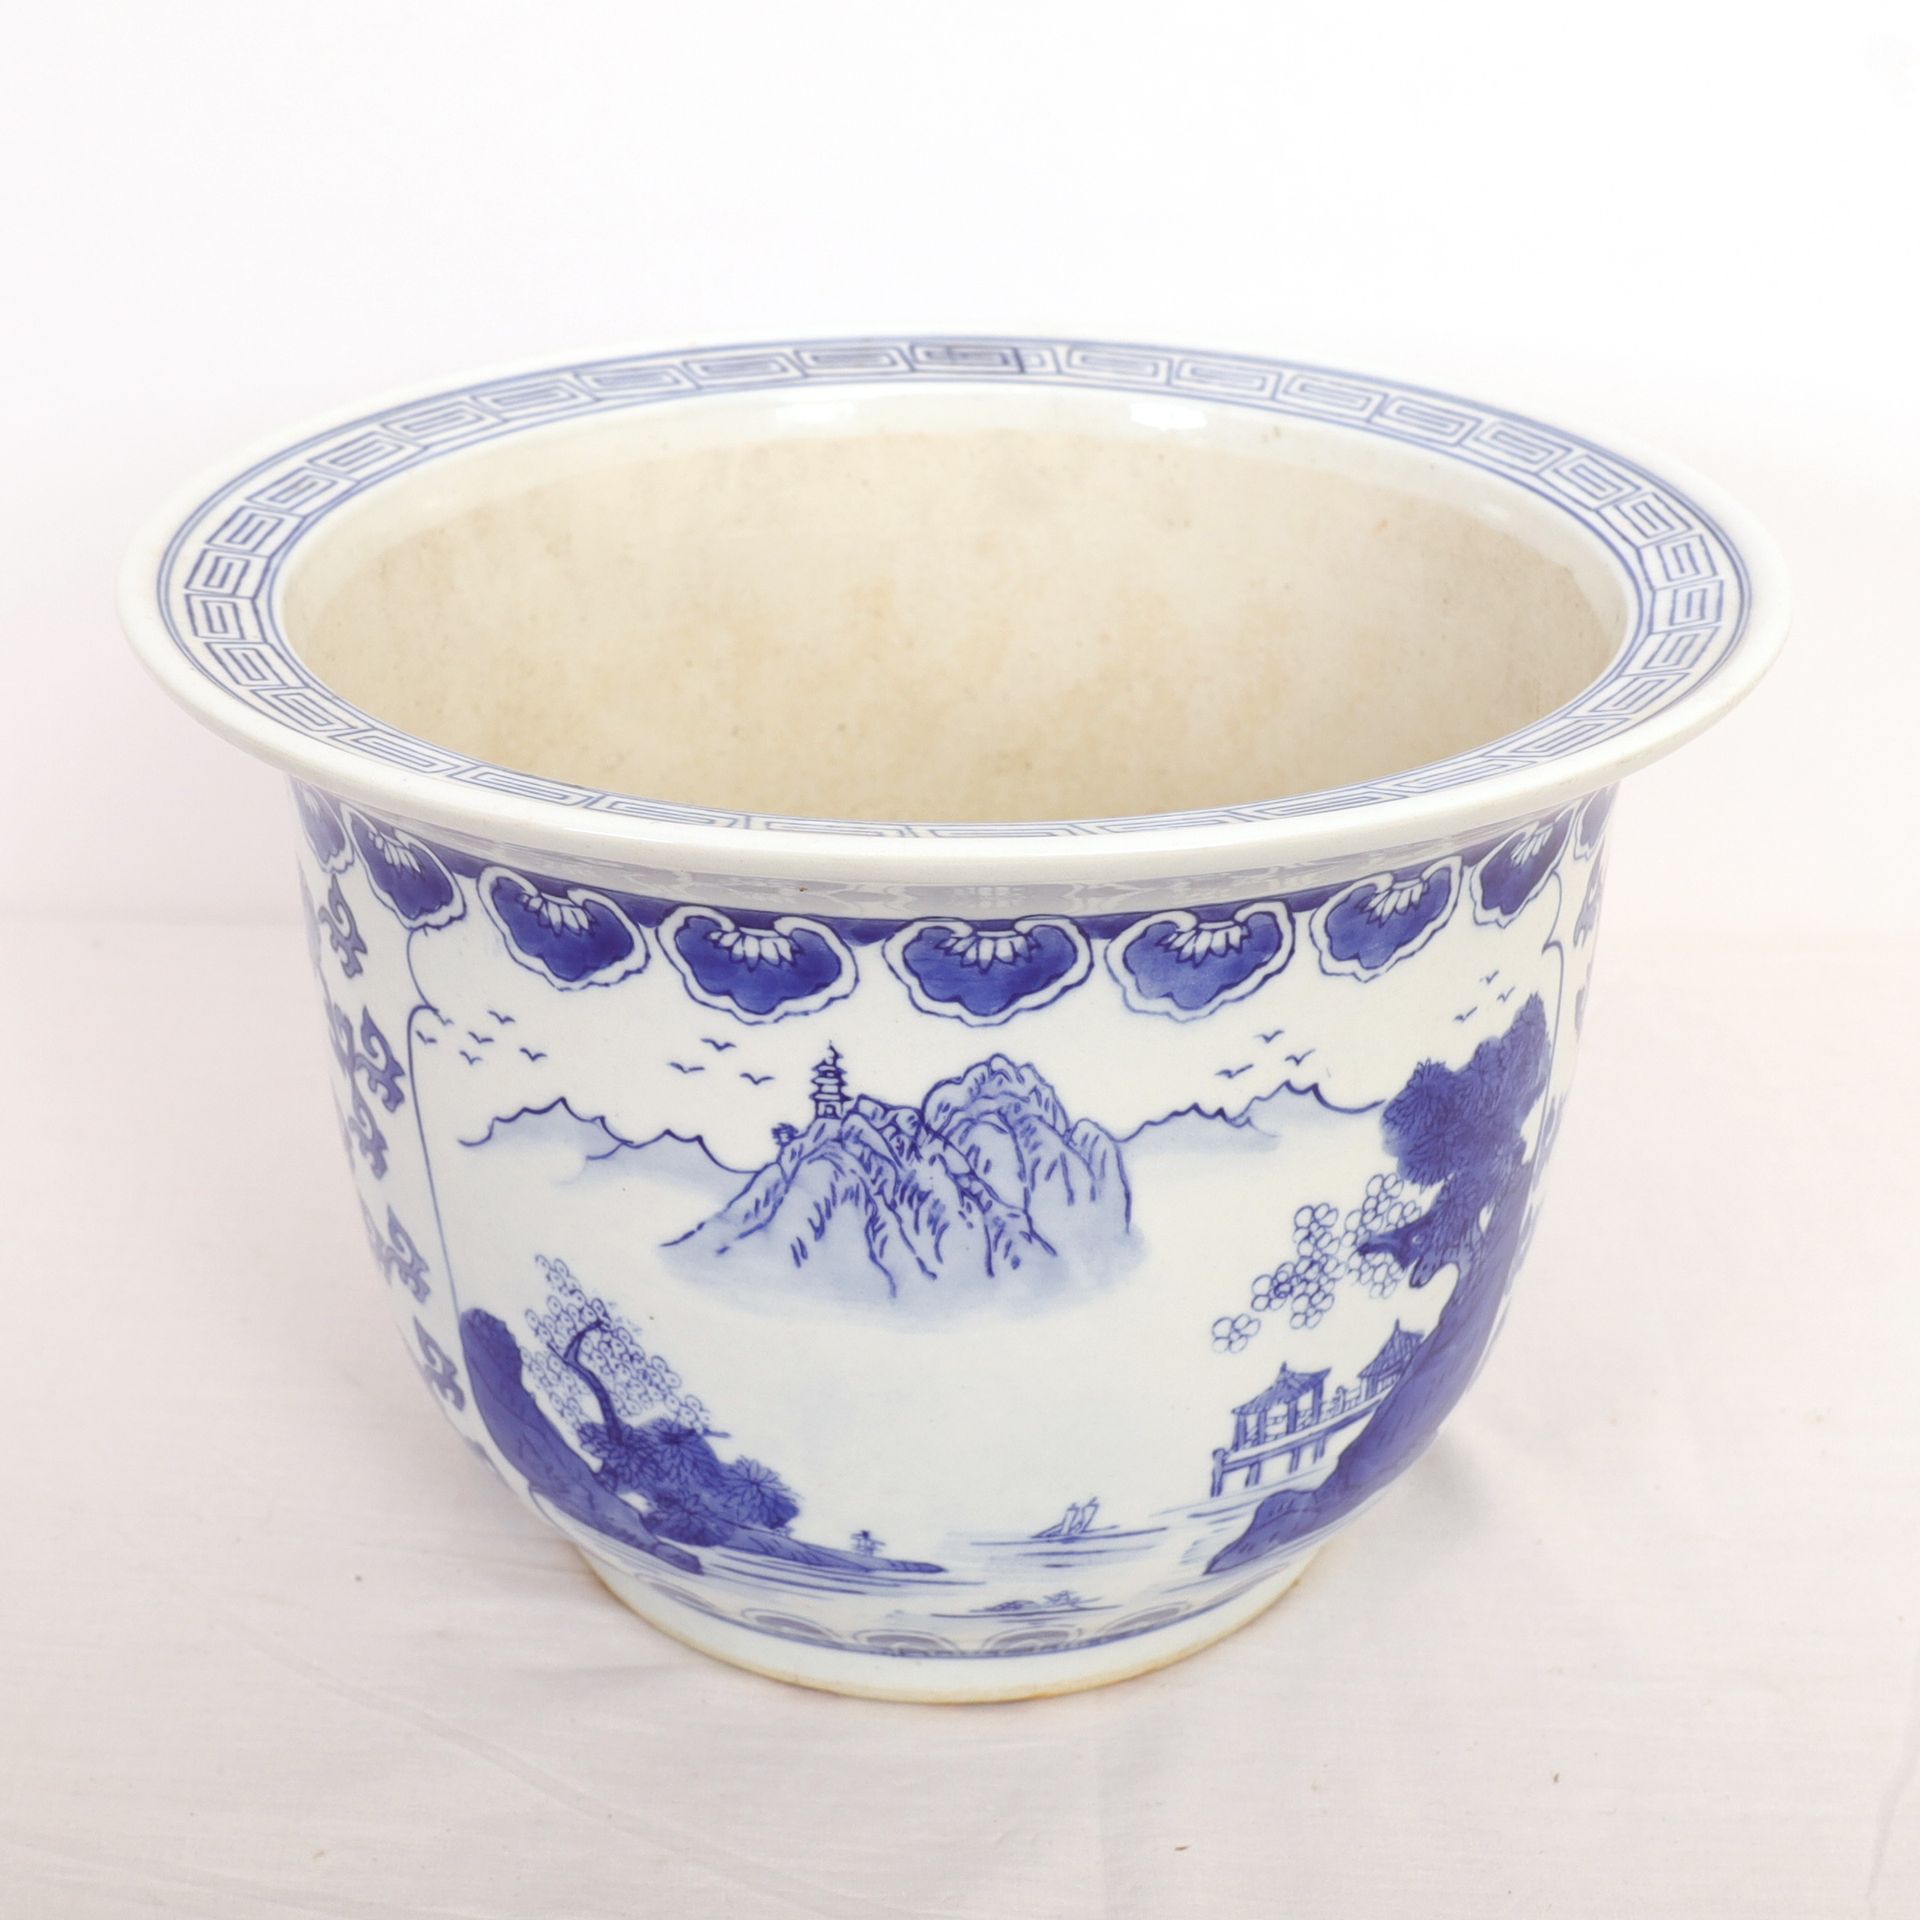 Null CHINA PORCELAIN POT with landscape, frieze and vegetal motifs

Late 19th - &hellip;